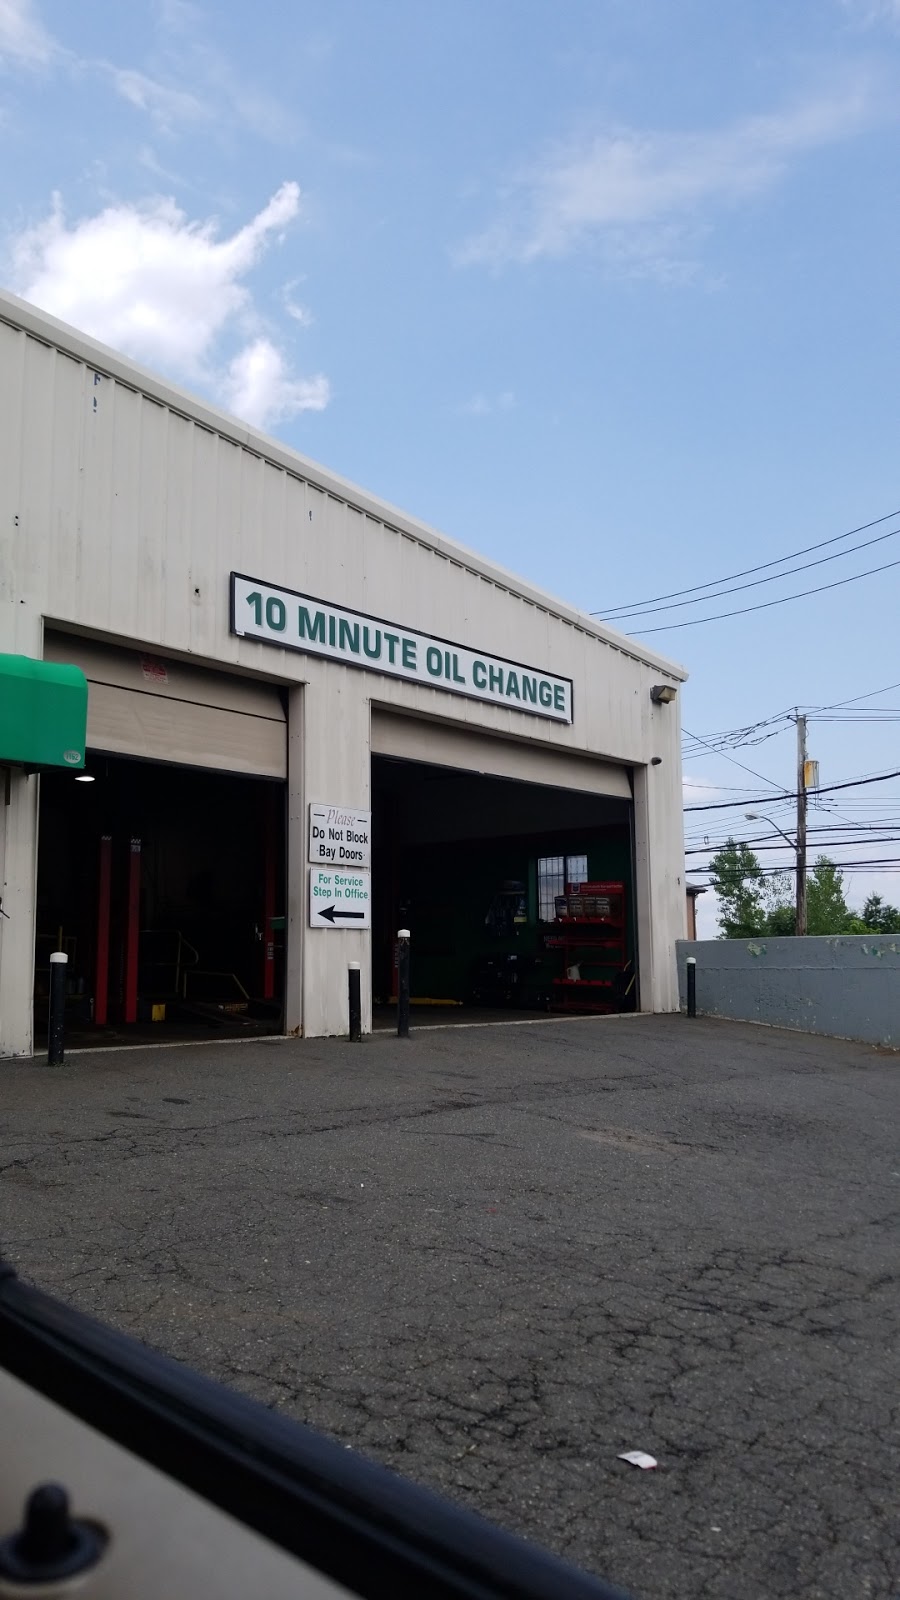 Meineke Car Care Center | 1162 Rossville Ave, Staten Island, NY 10309 | Phone: (718) 355-8720